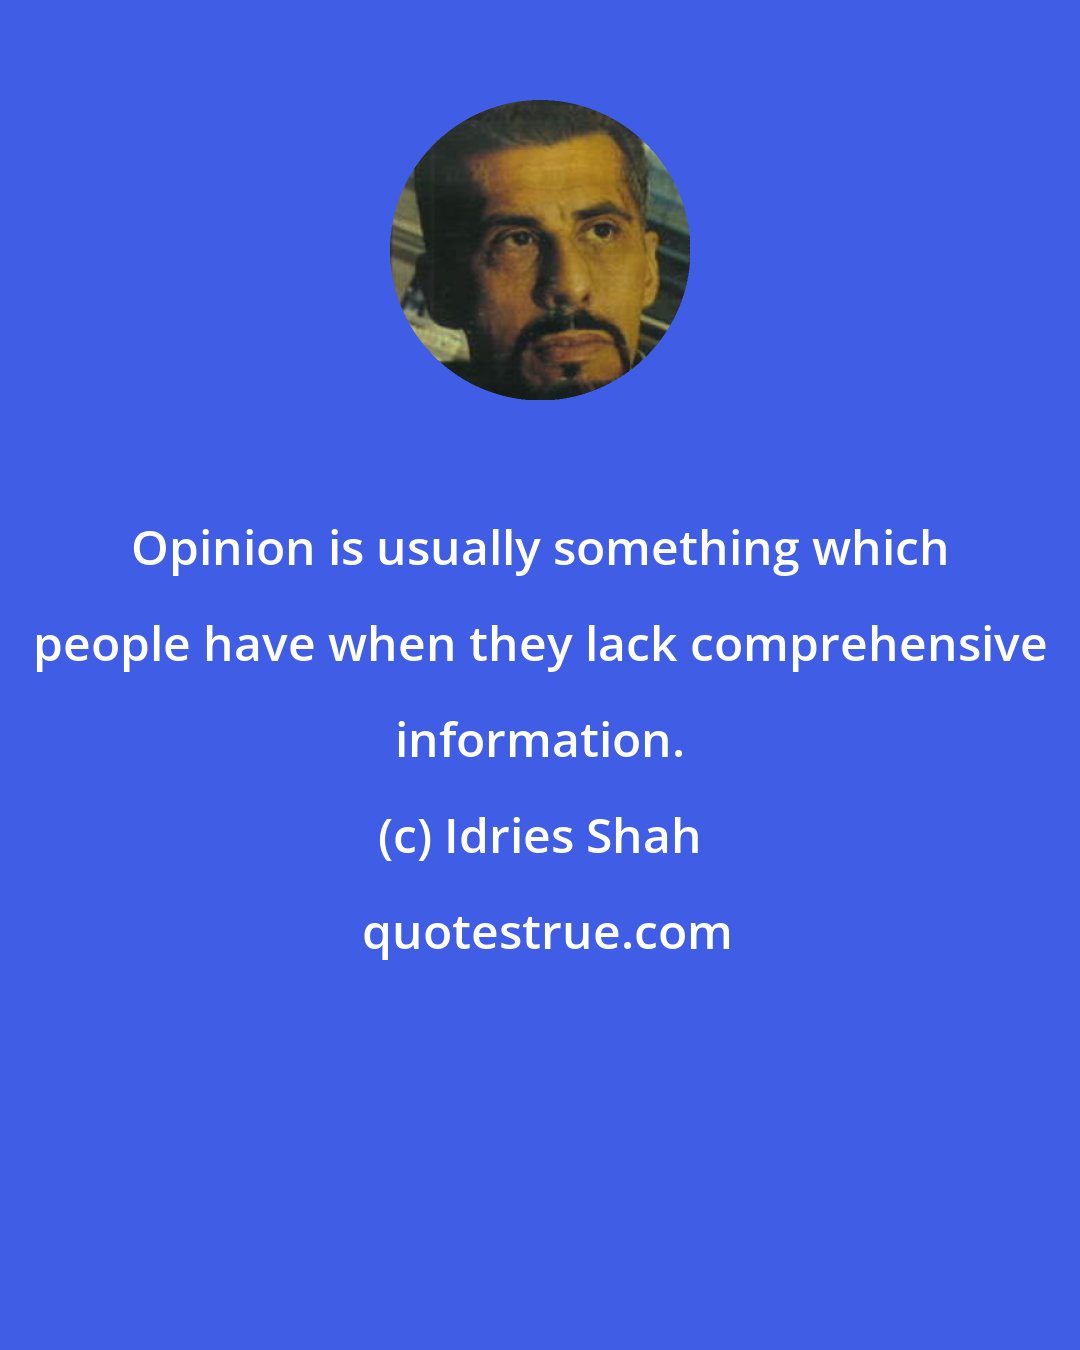 Idries Shah: Opinion is usually something which people have when they lack comprehensive information.